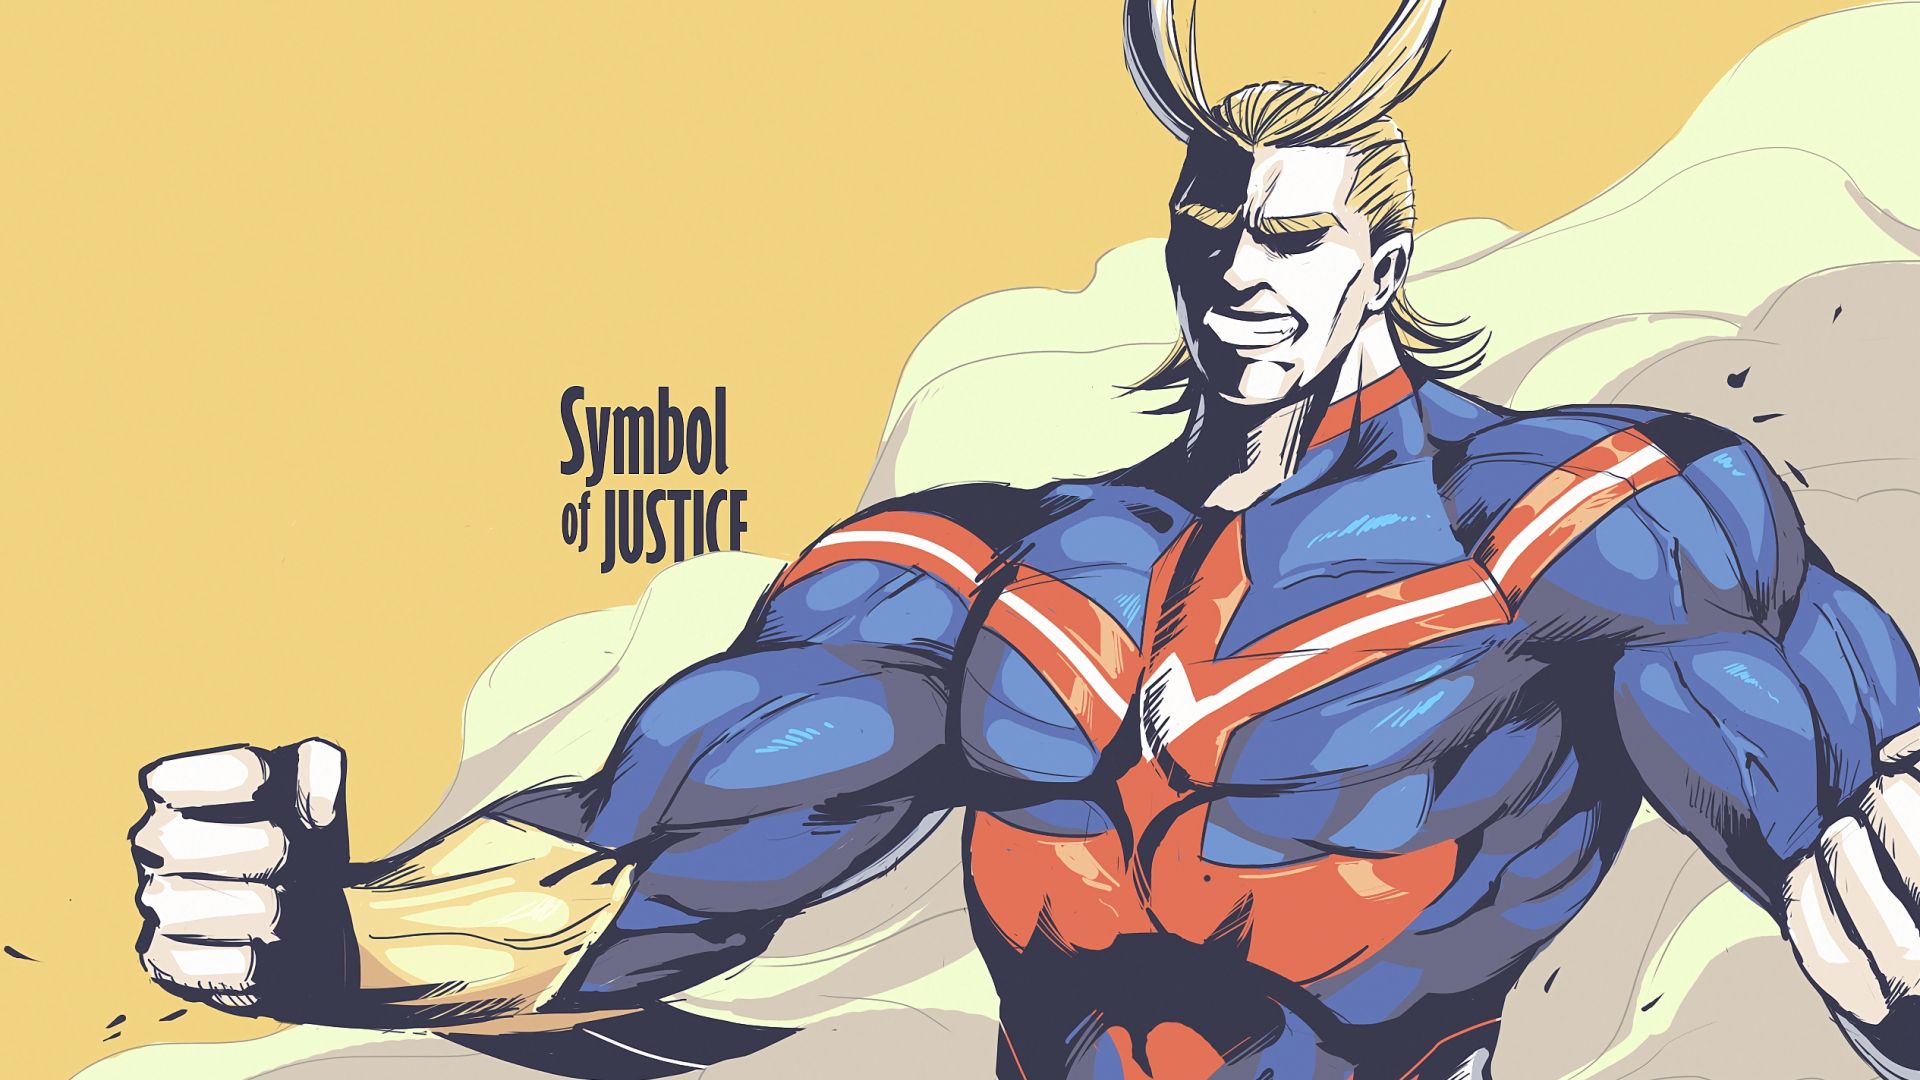 Wallpaper All might, anime boy, justice, My Hero Academia